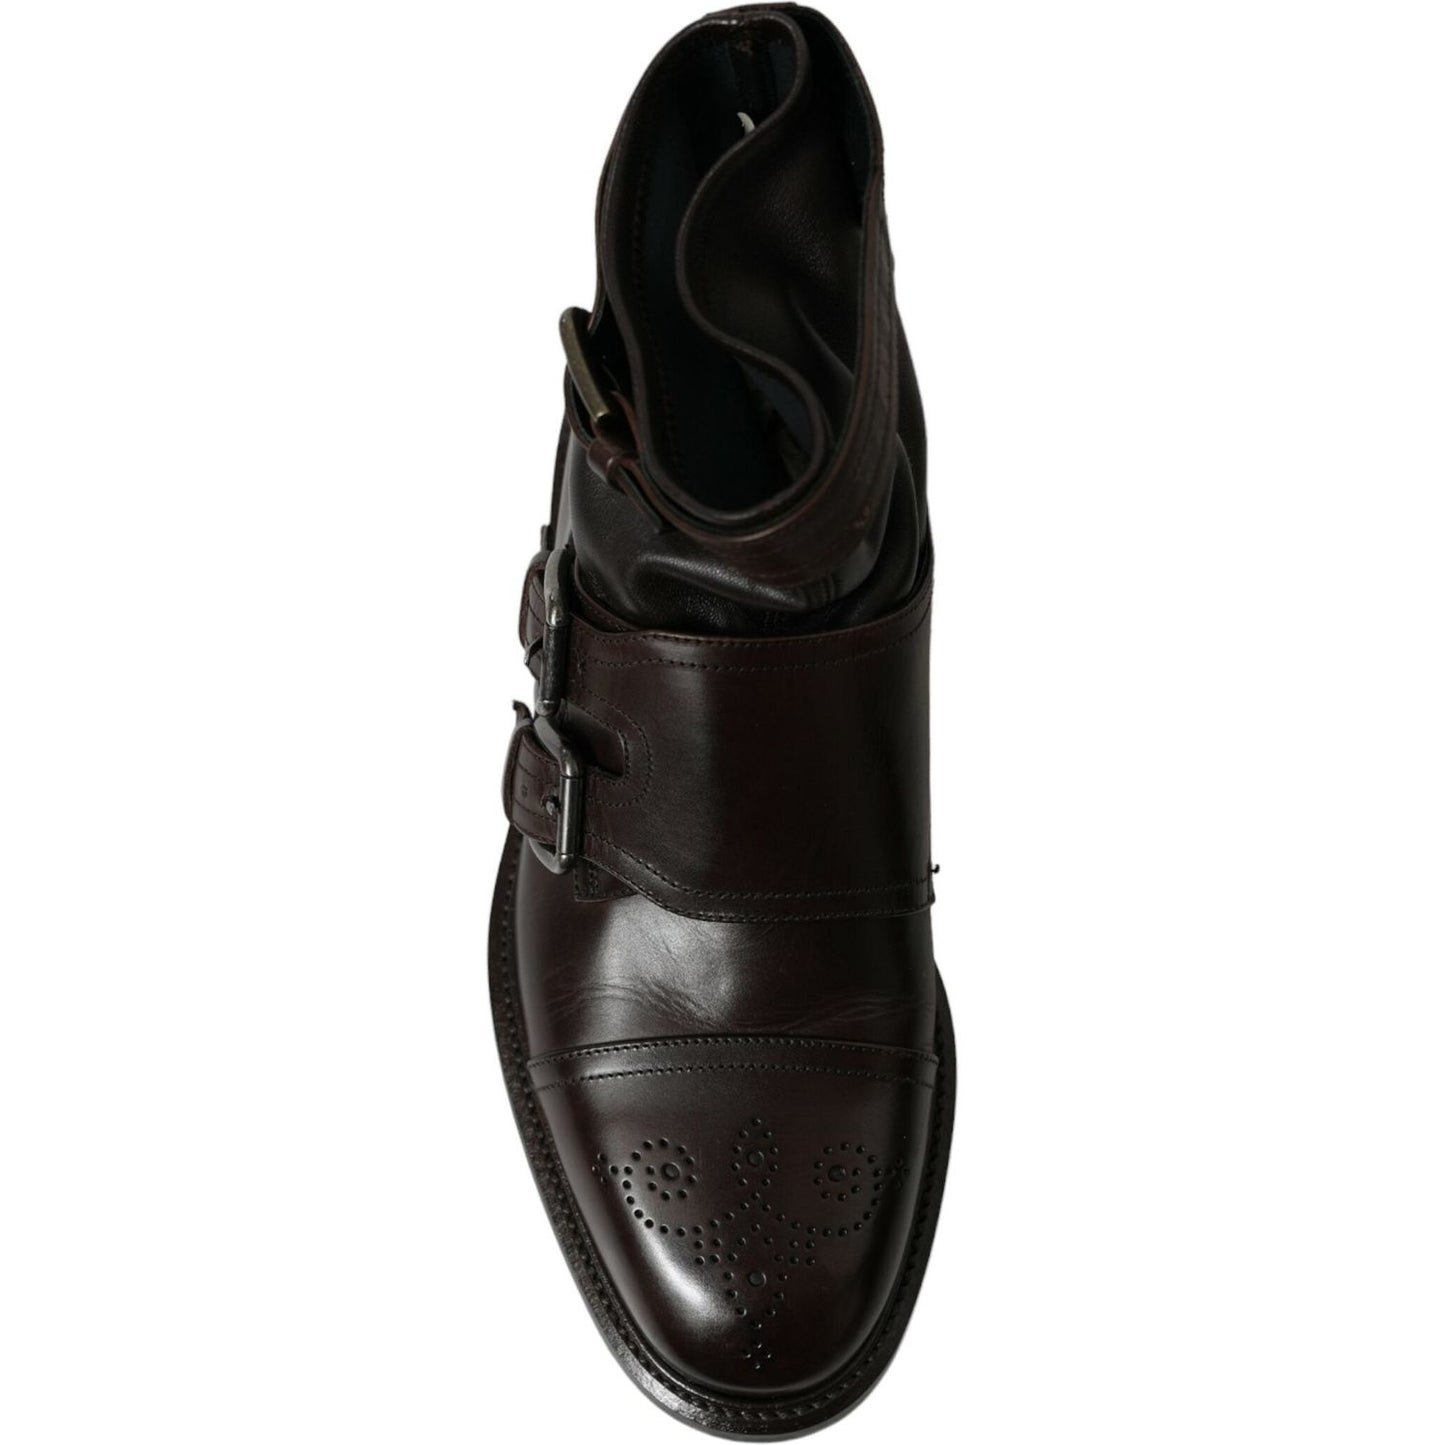 Dolce & Gabbana Elegant Mens Leather Ankle Boots brown-leather-straps-ankle-boots-shoes